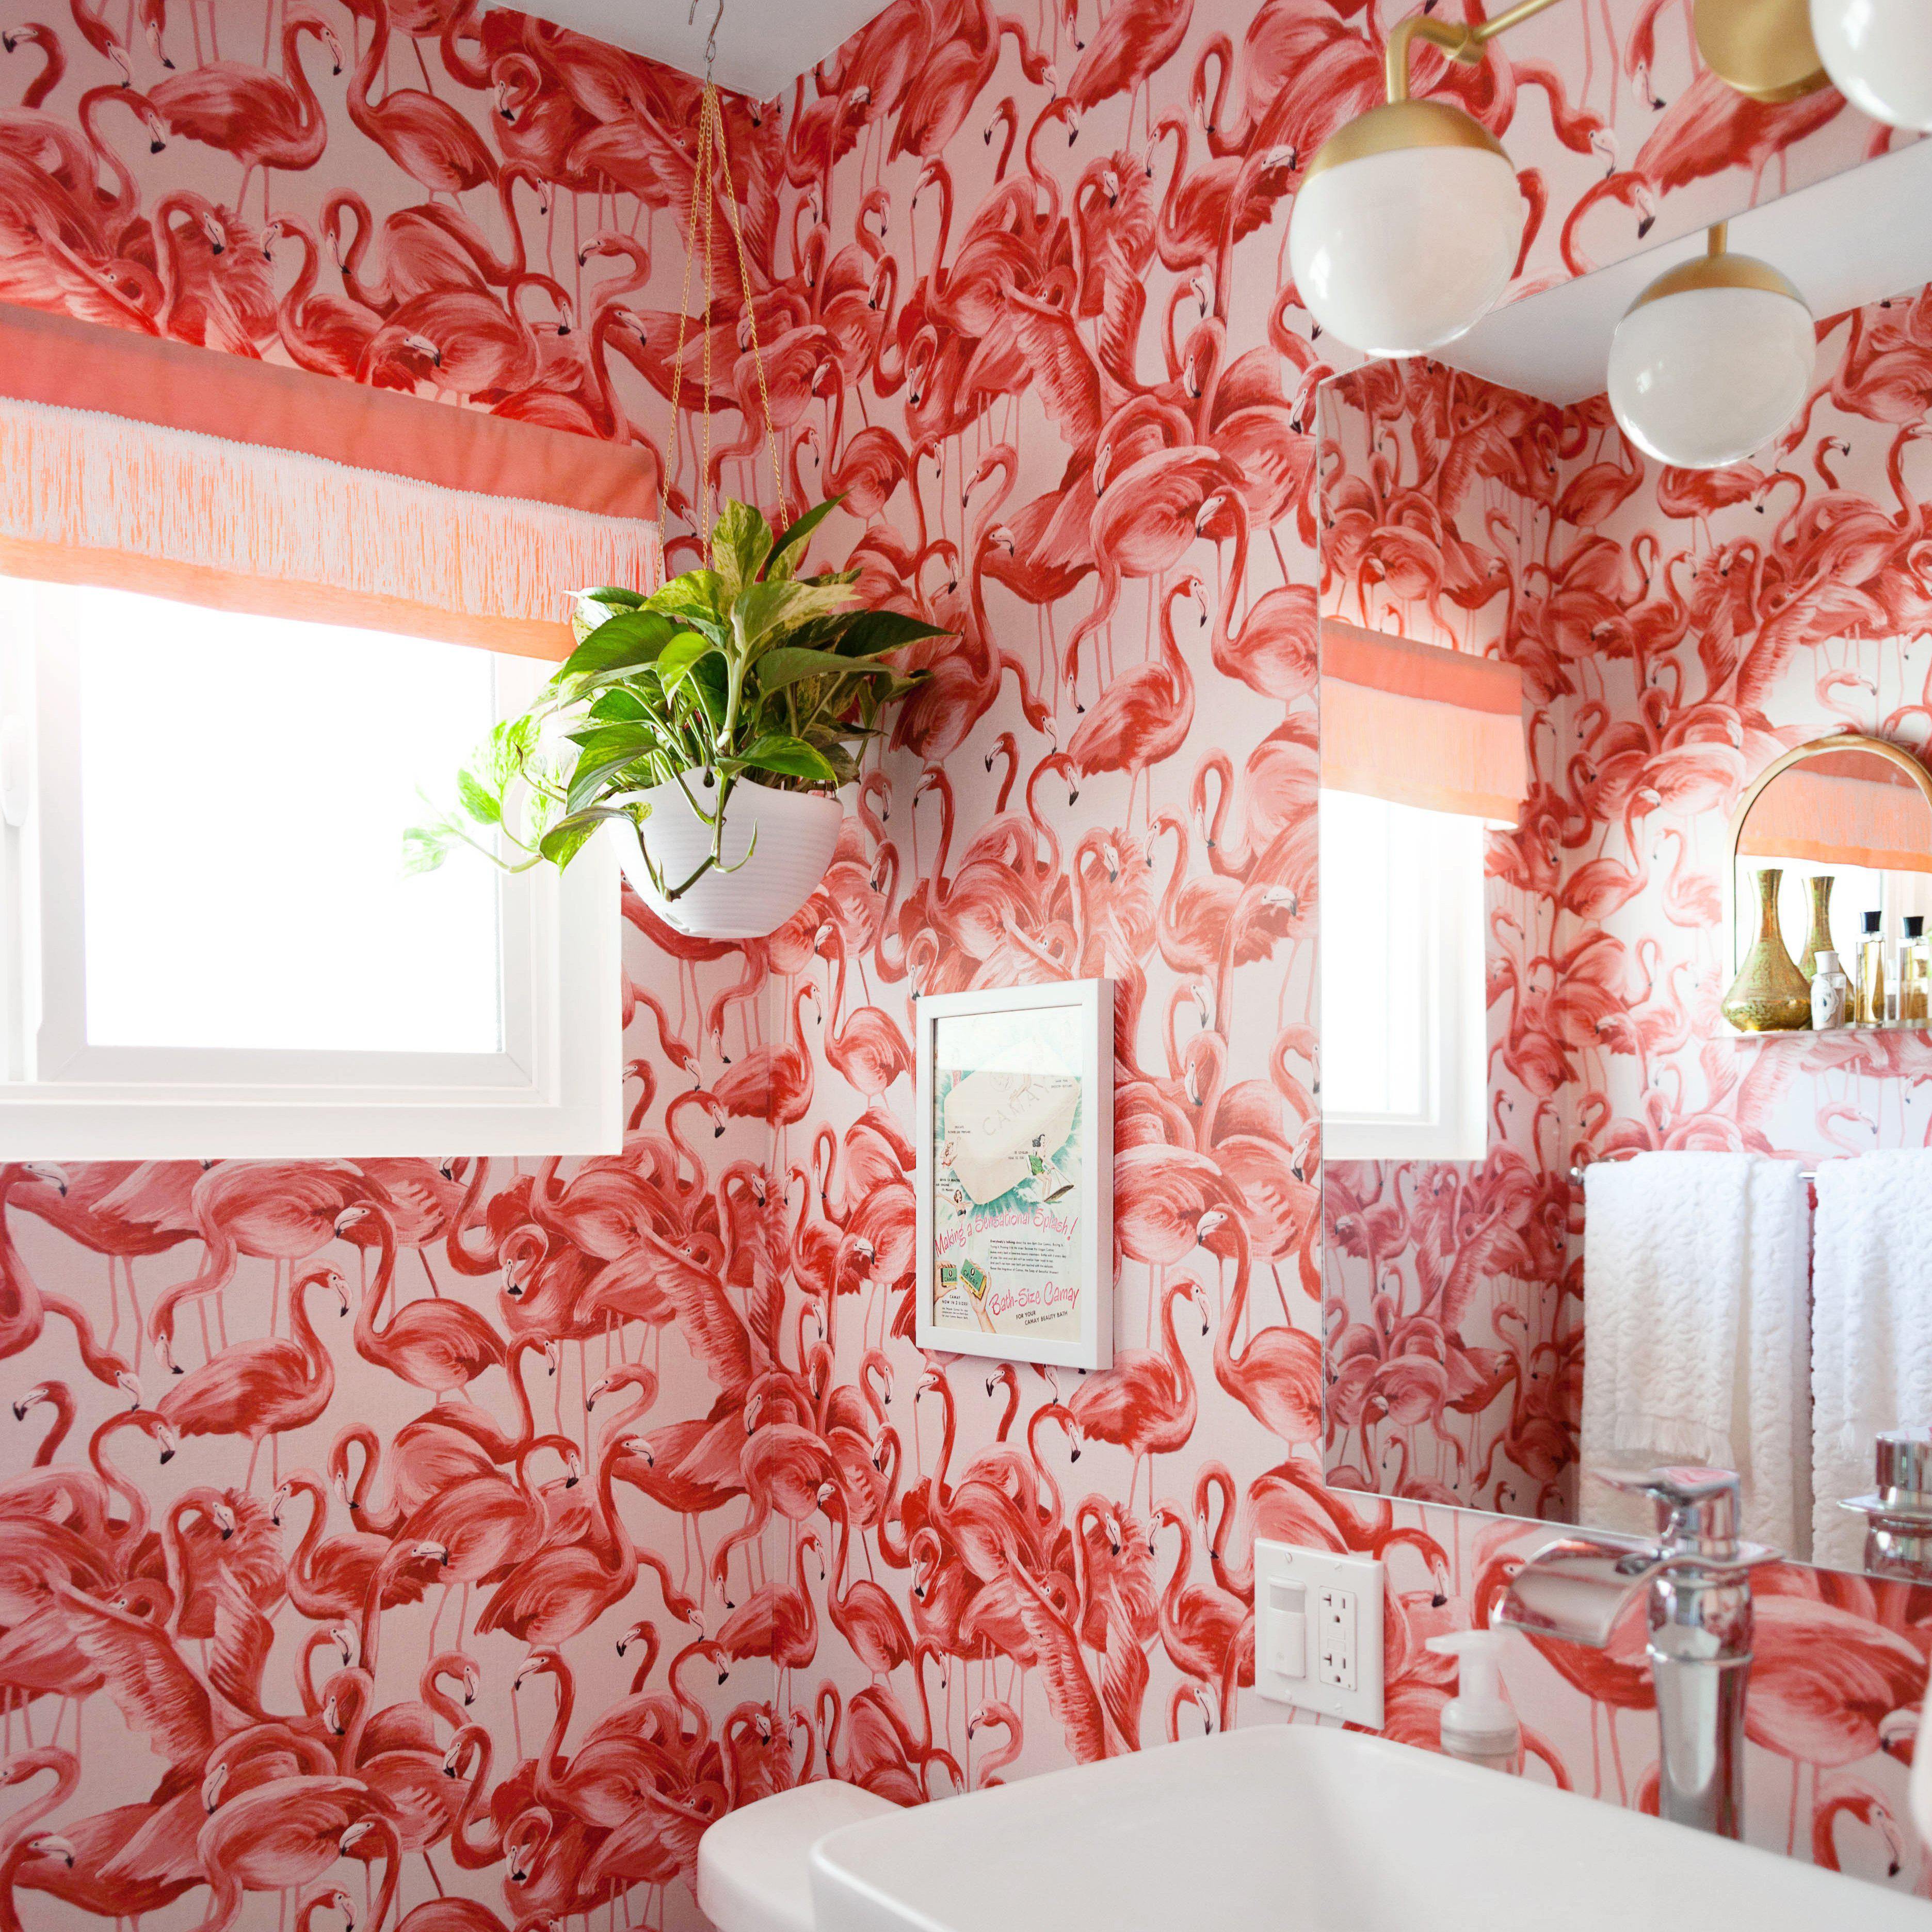 Tempaper Designs LIFESTYLE - Flamingo Cheeky Pink Peel and Stick Wallpaper